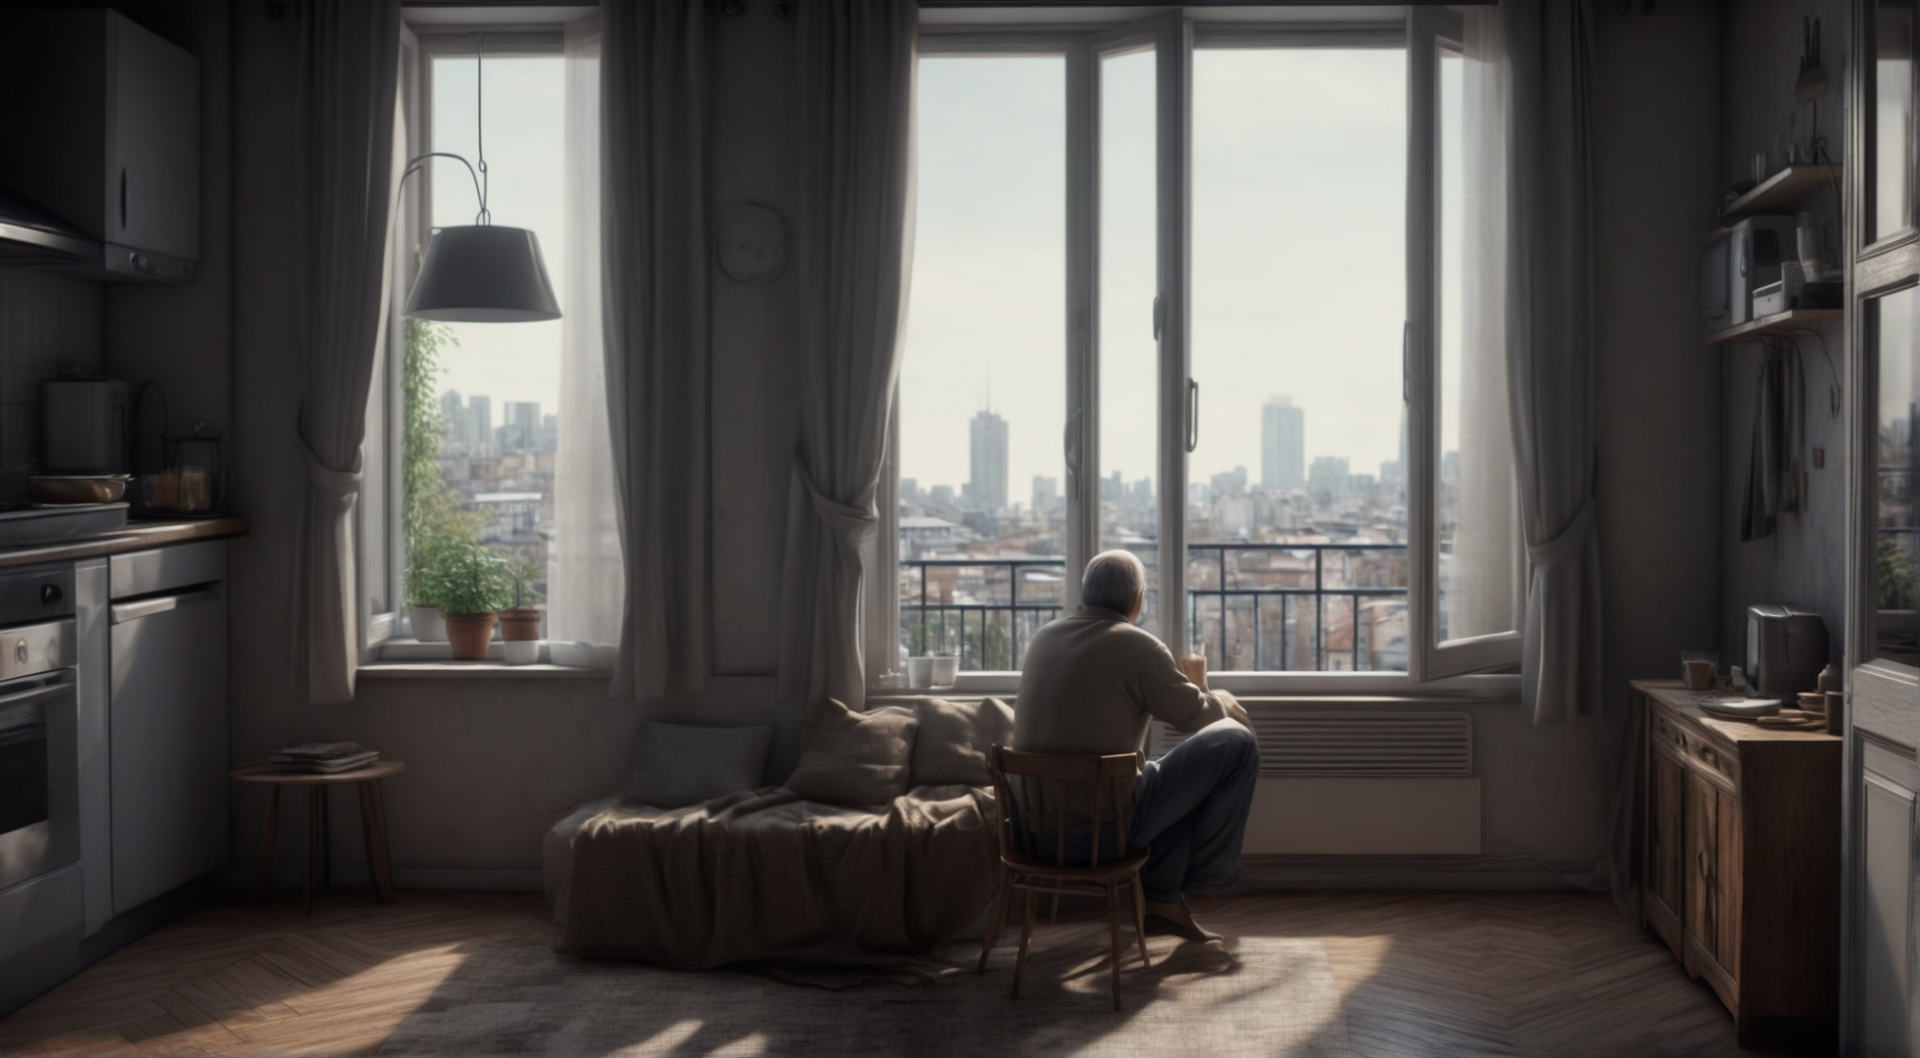 A middle-aged man sitting alone in his apartment, staring out the window)